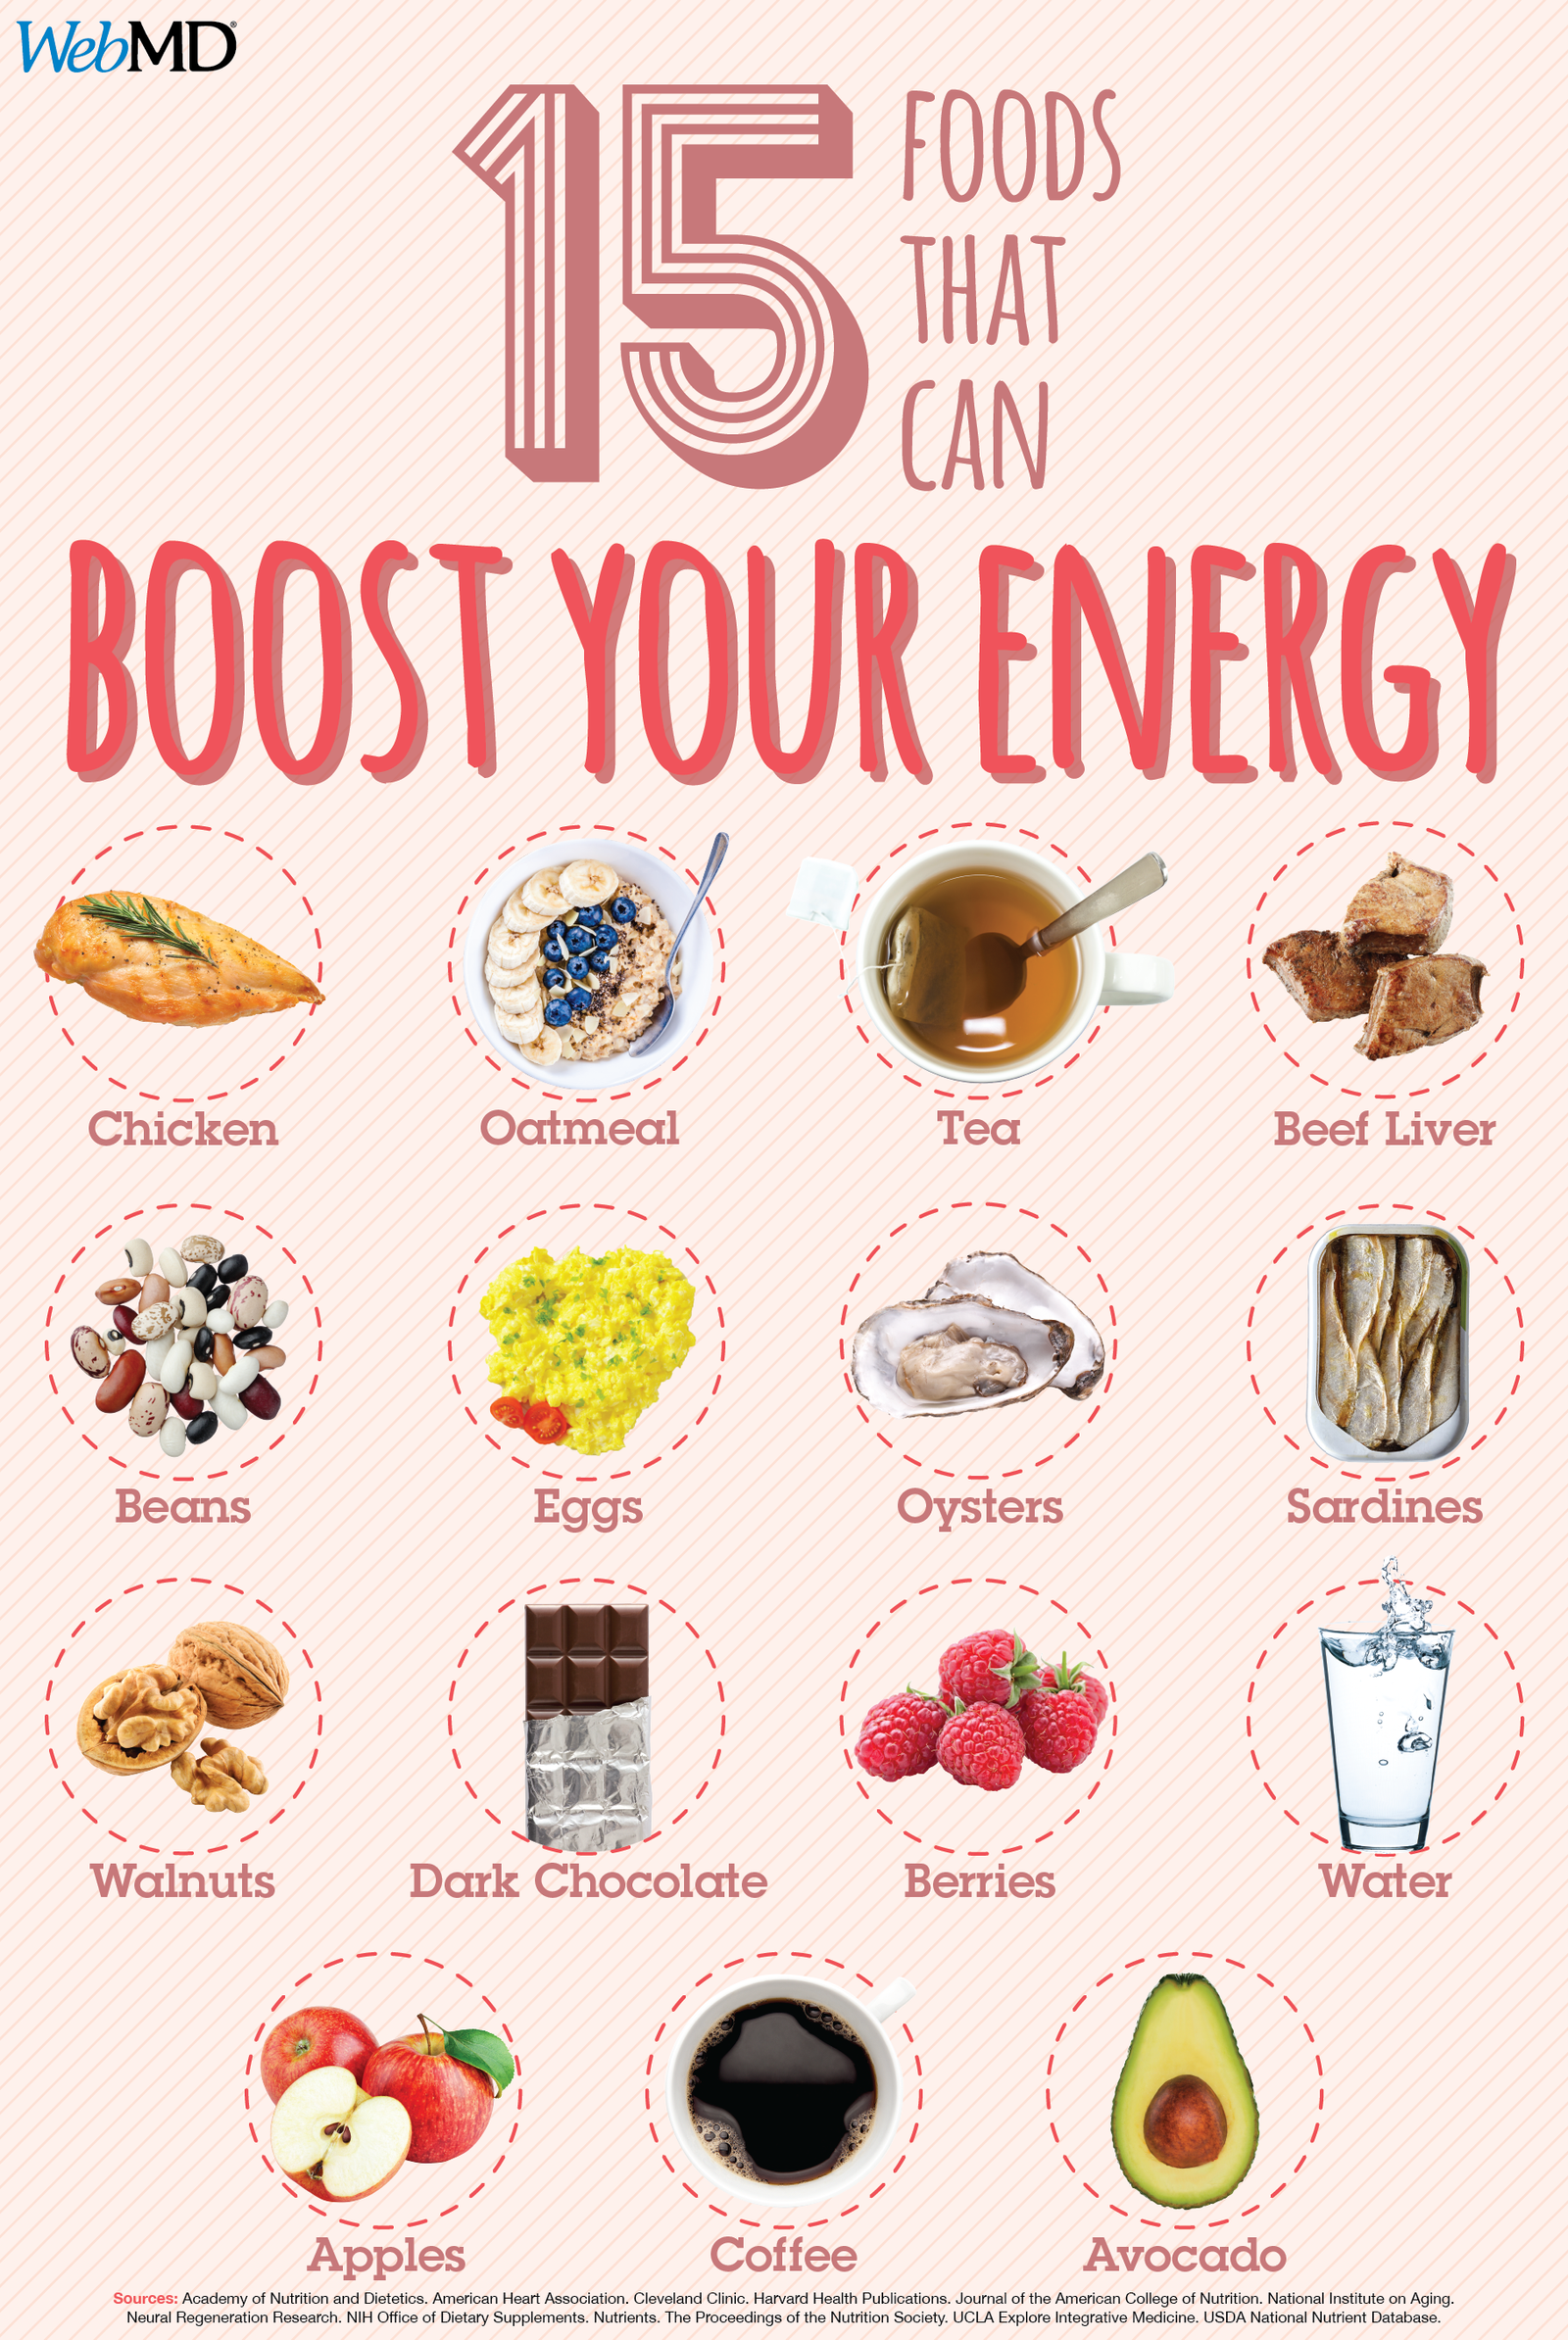 Best Foods for Boosting Energy